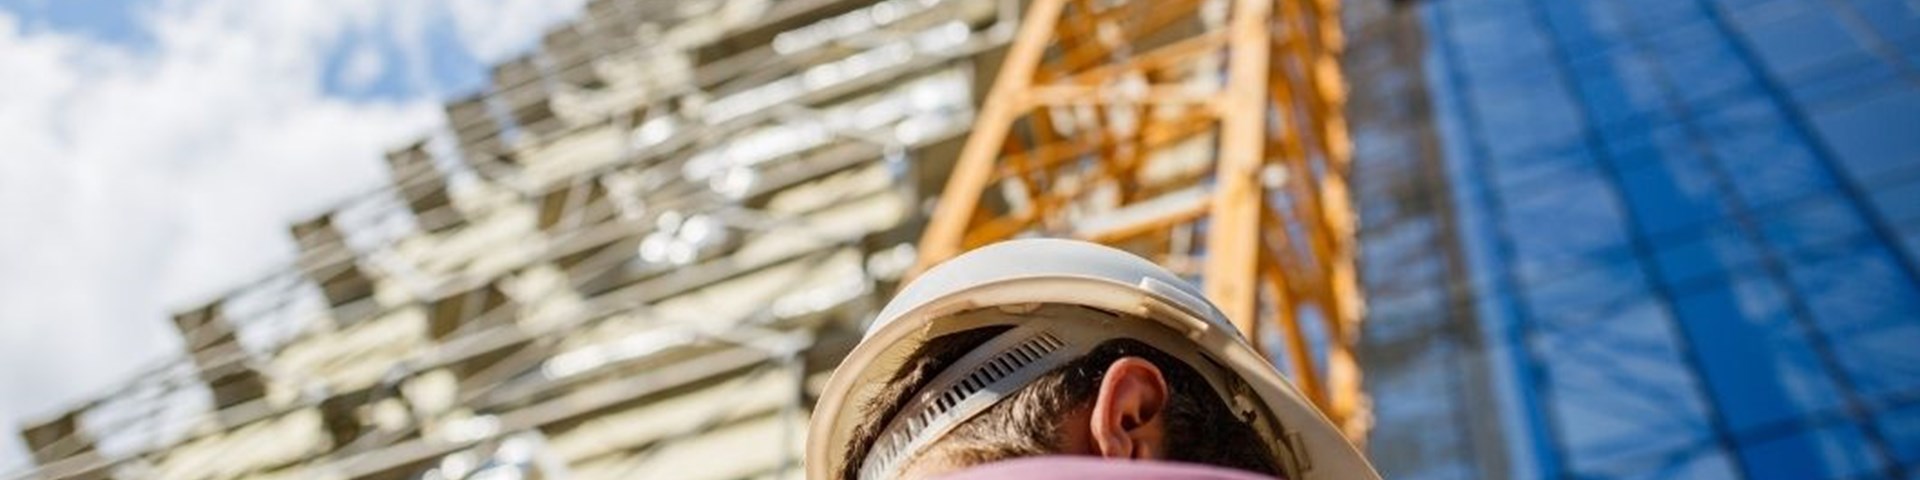 man with hard hat standing in front of scaffolding - insurance for construction professionals